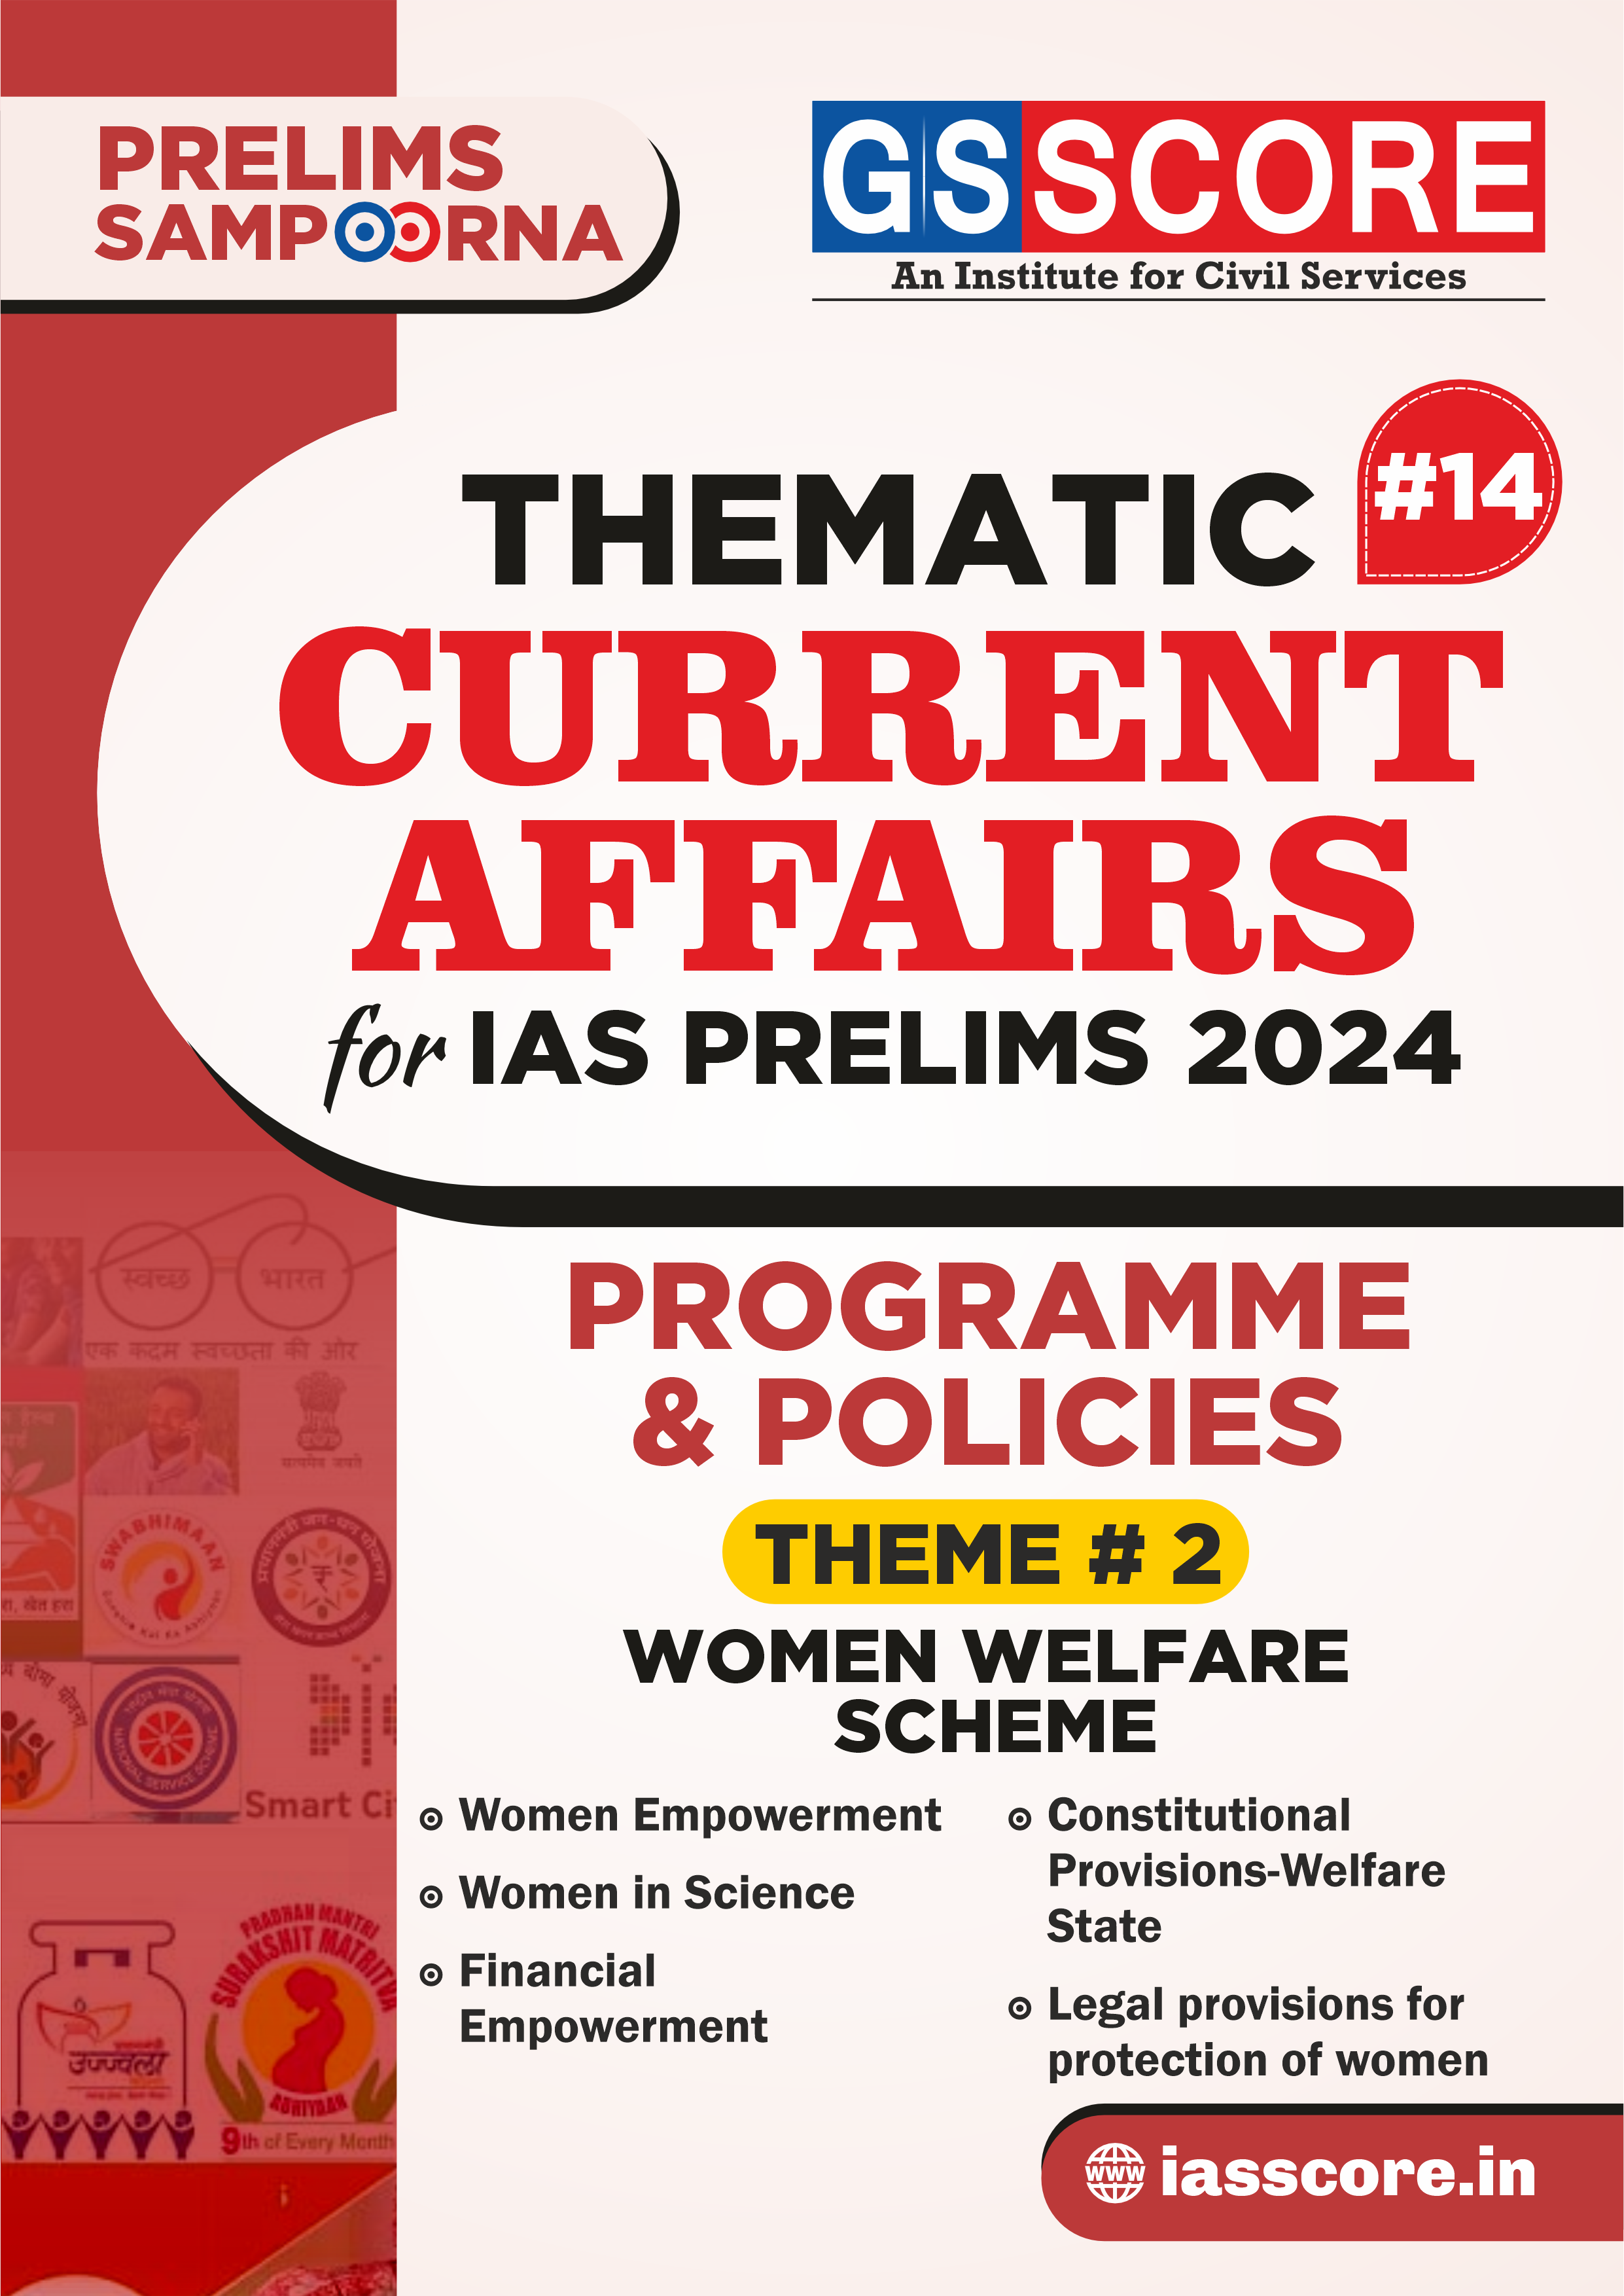 Thematic Current Affairs -14 Programmes & Policies-2 (Women Welfare)